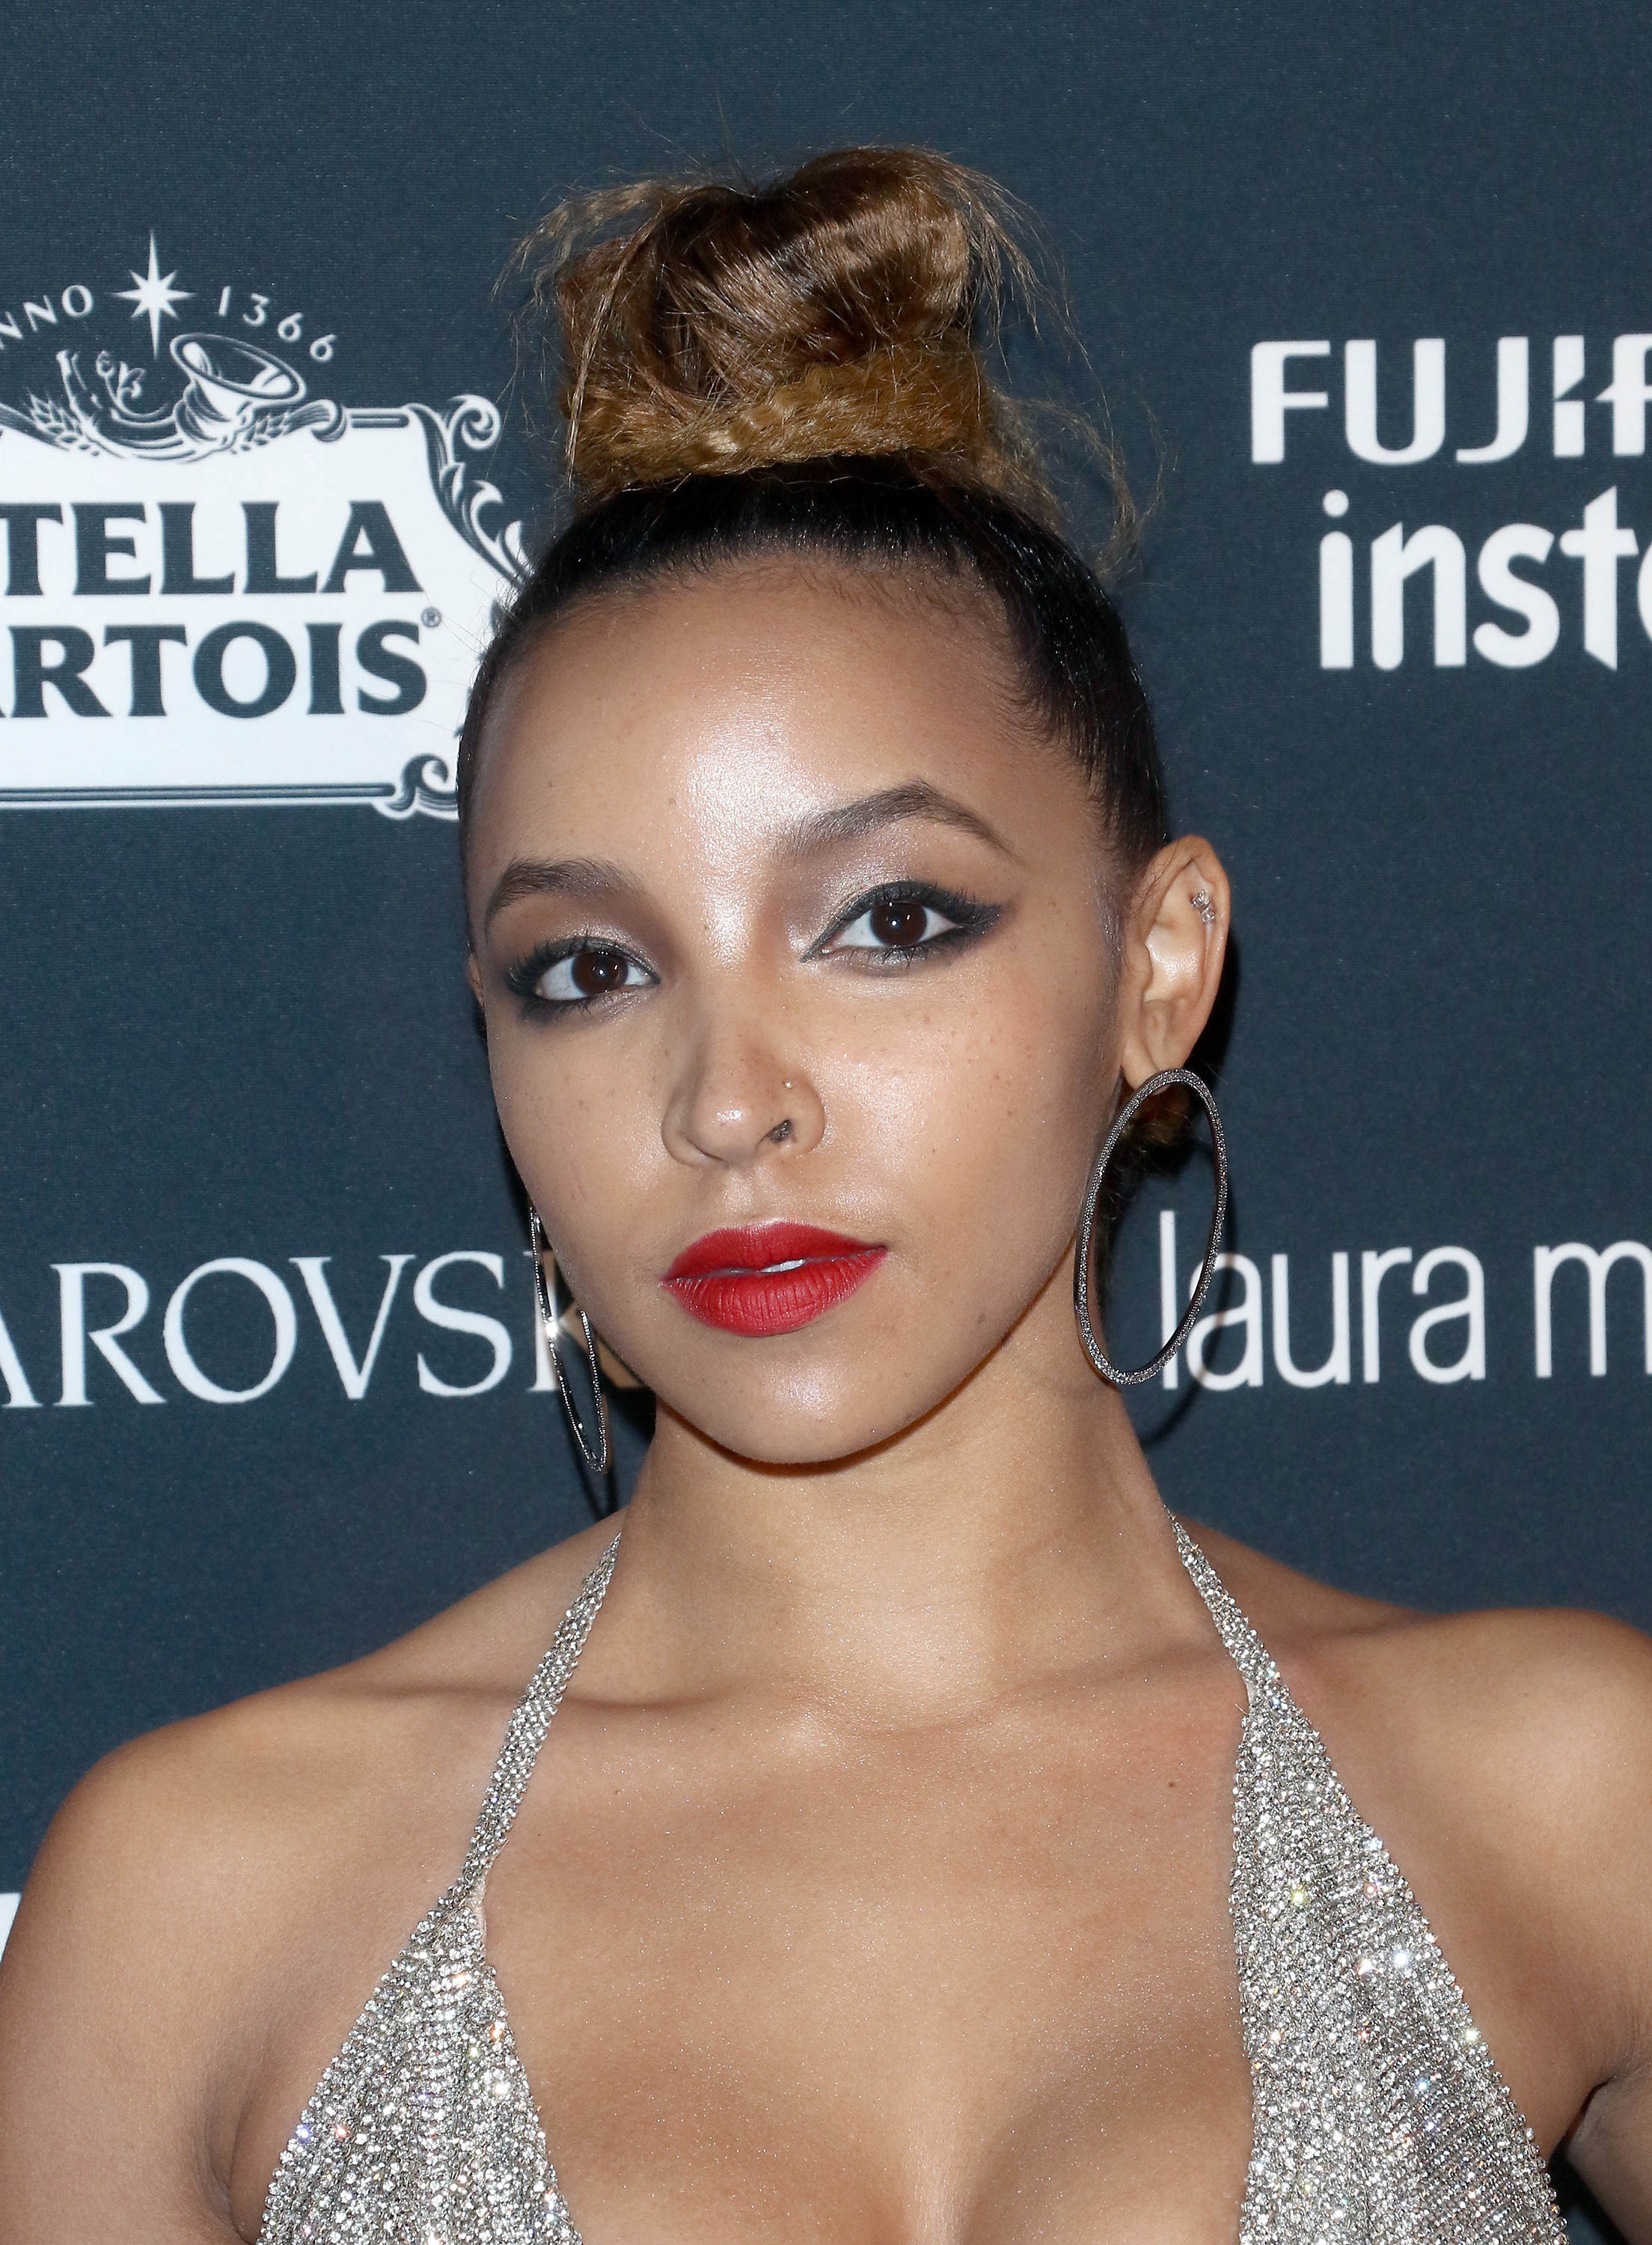 Close-up of Tinashe at a media event in a bejeweled halter top